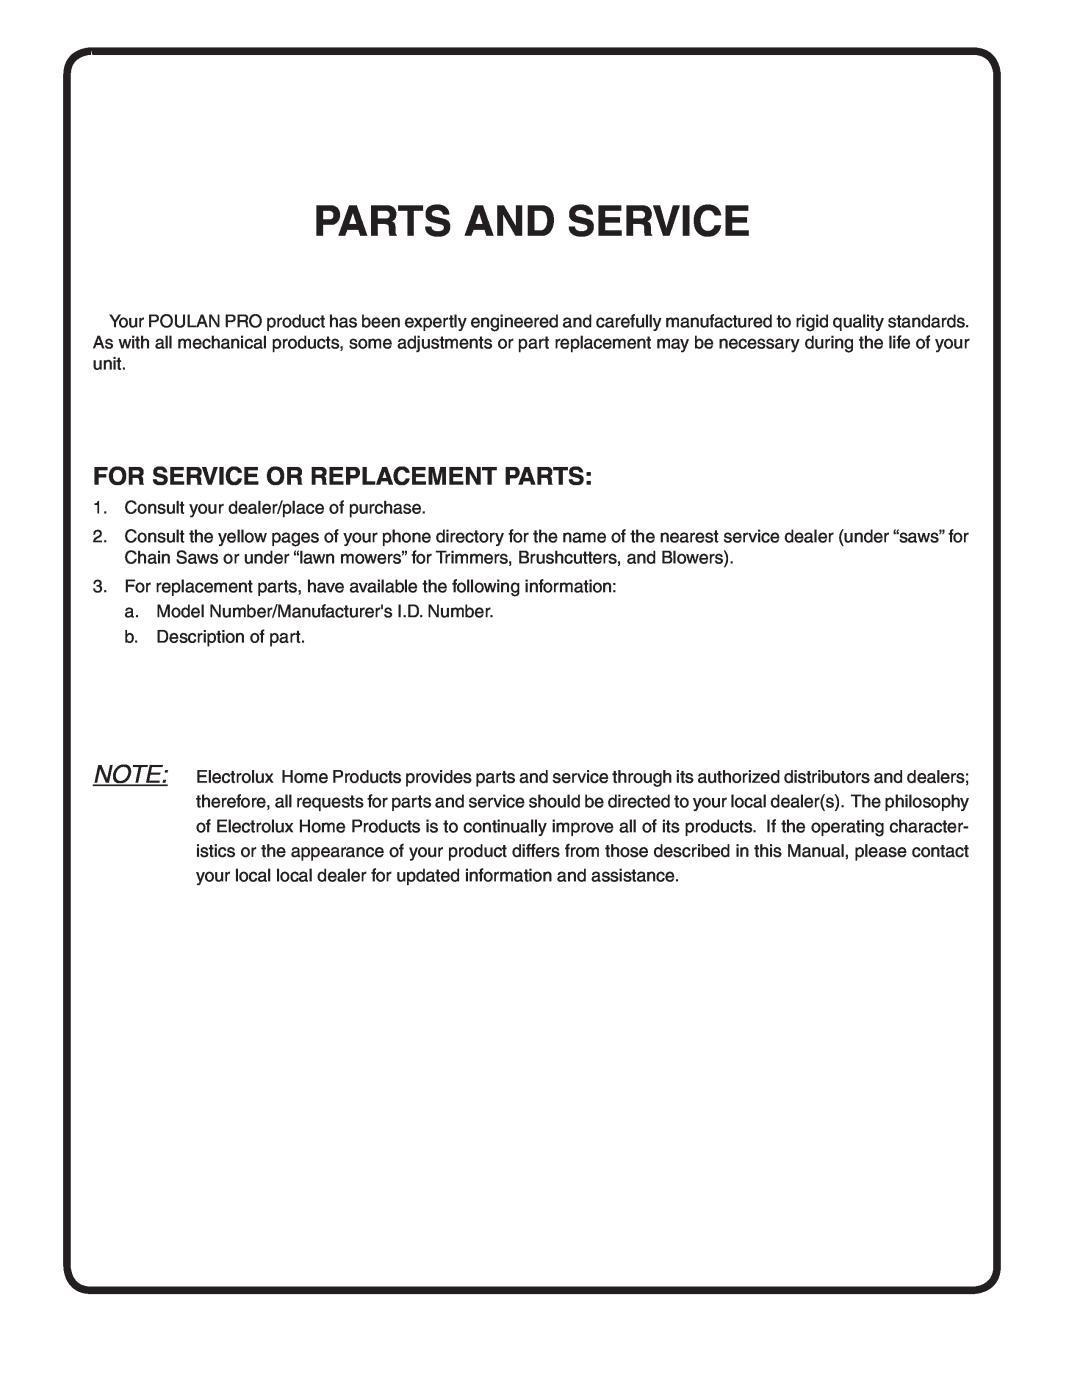 Poulan PD22H42STC owner manual Parts And Service, For Service Or Replacement Parts 